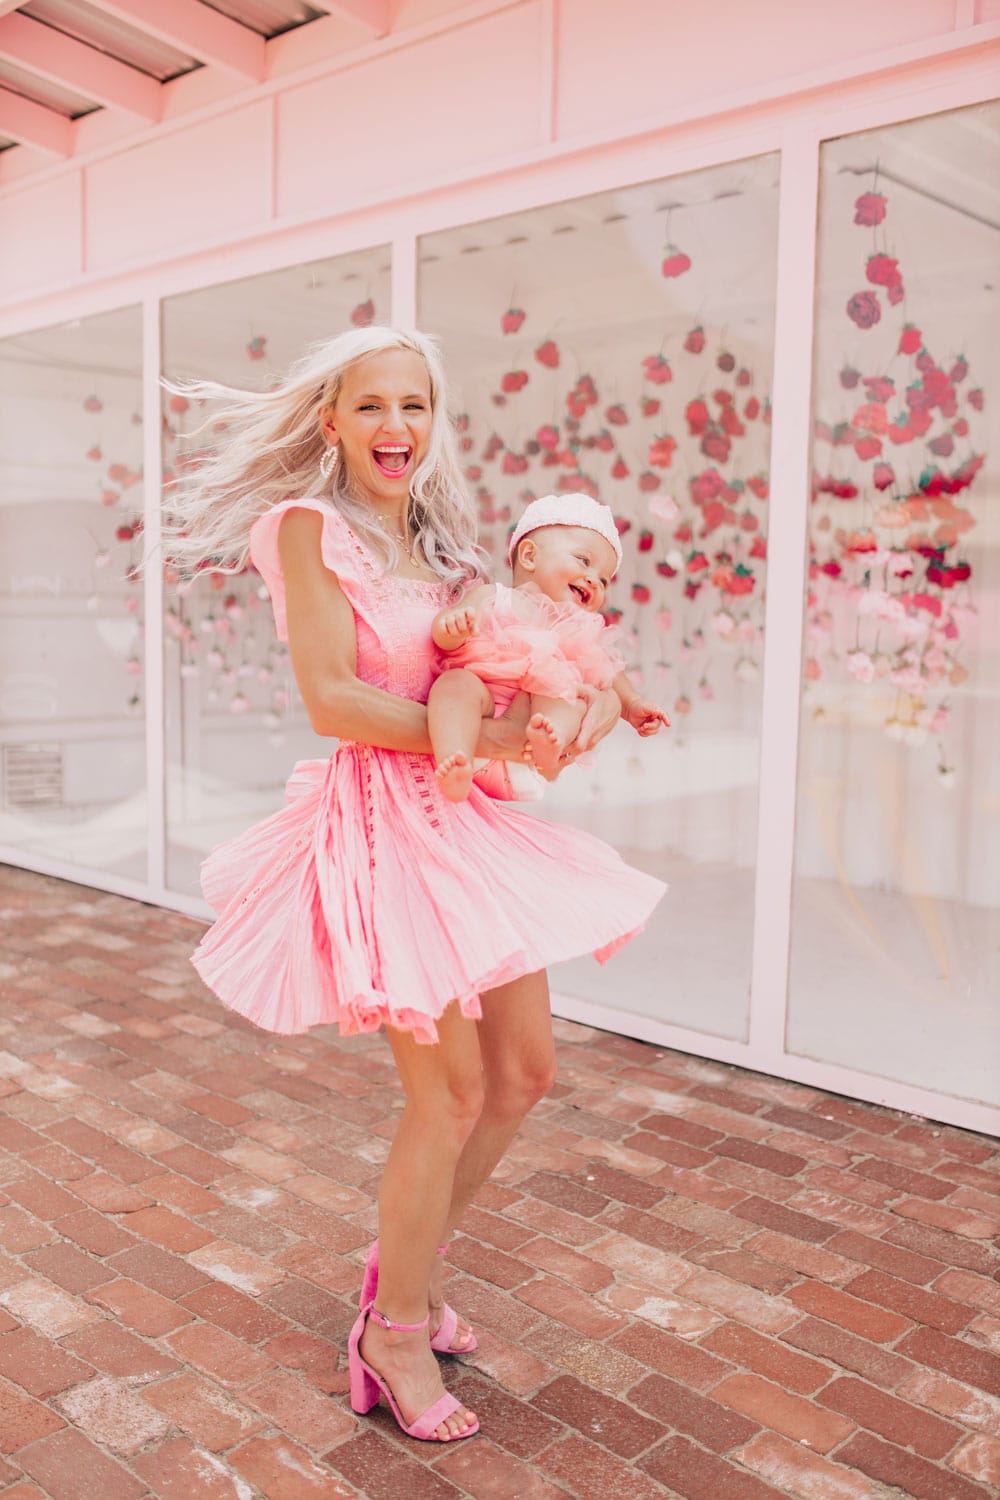 family photo ideas - mommy and me photography tips and poses - pink outfits and location - twirling pose